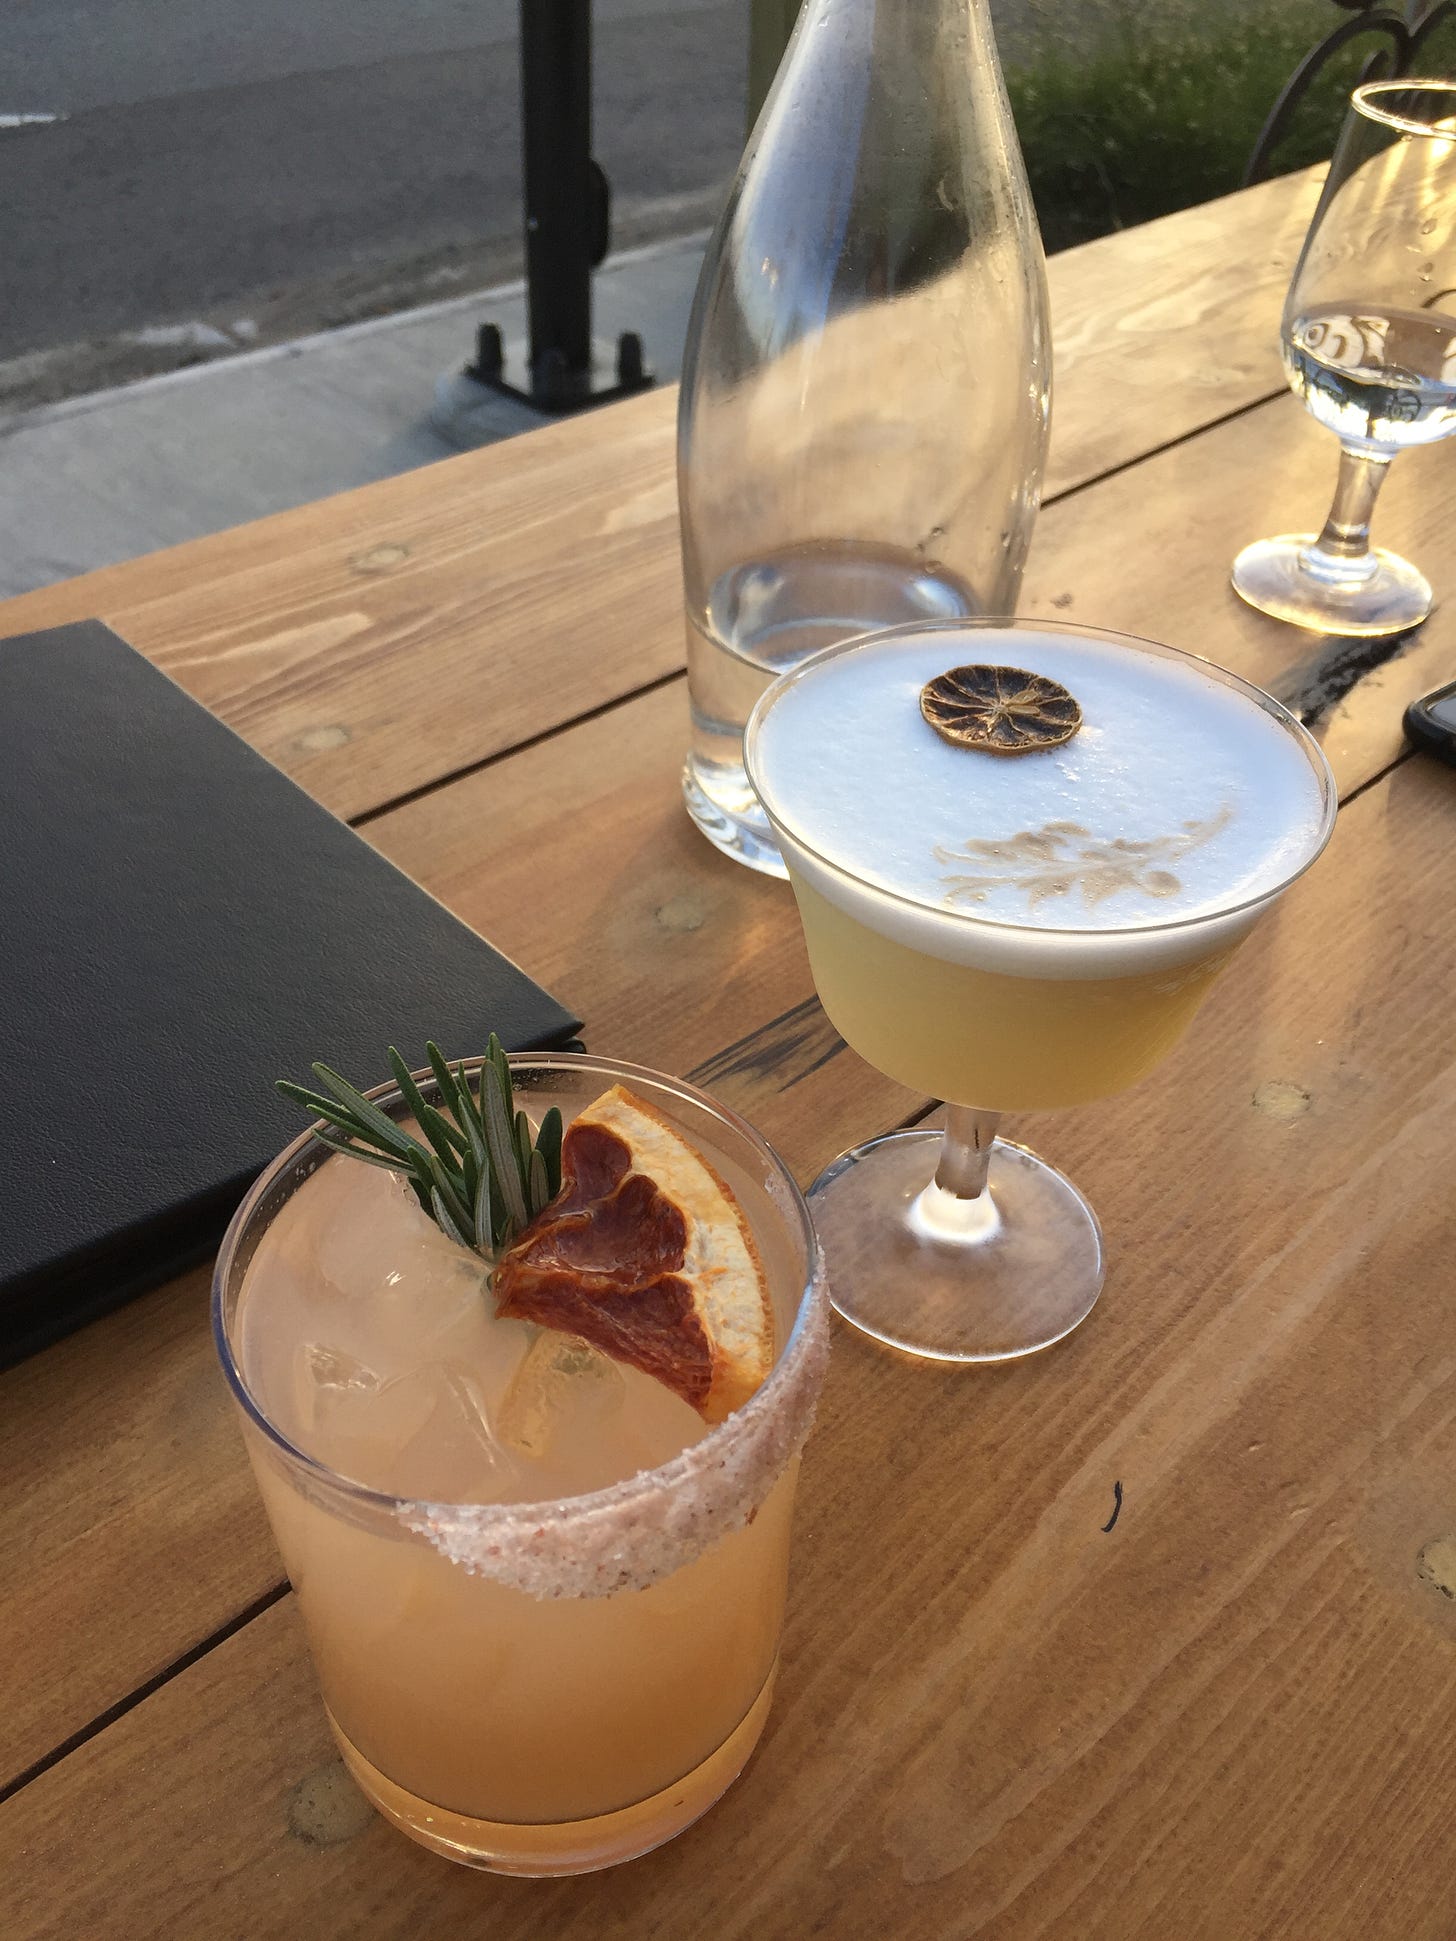 On a wooden outdoor bar are two cocktails in the foreground amongst a black menu, a large glass bottle of water, and water glasses. In a short glass is a light pink Paloma with a sprig of rosemary and dehydrated grapefruit, and a salted rim; and in a coupé glass is a foamy sour with a dried lime slice and a leaf drawn in the foam with bitters.